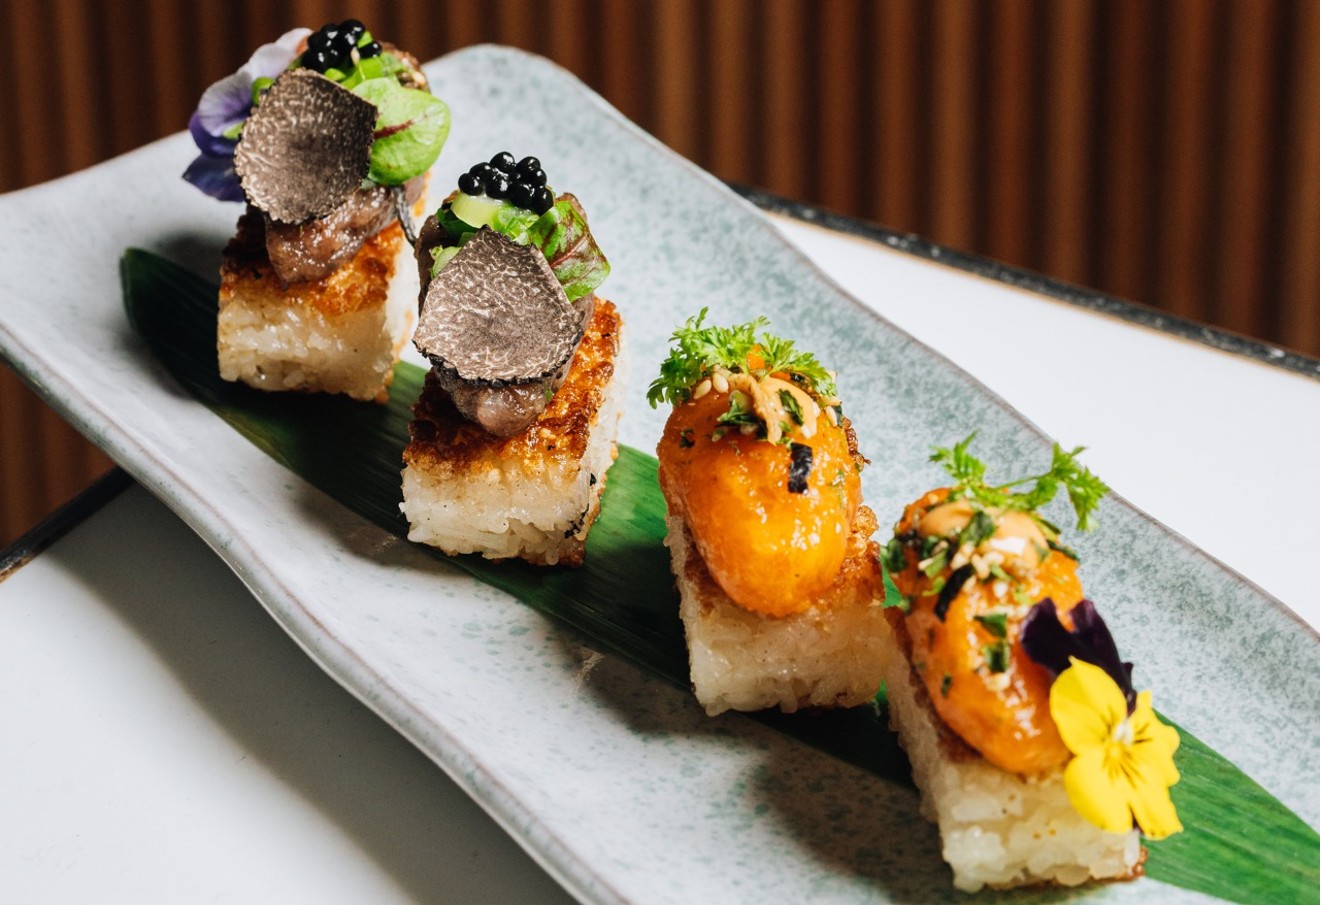 New dishes from Katsuya